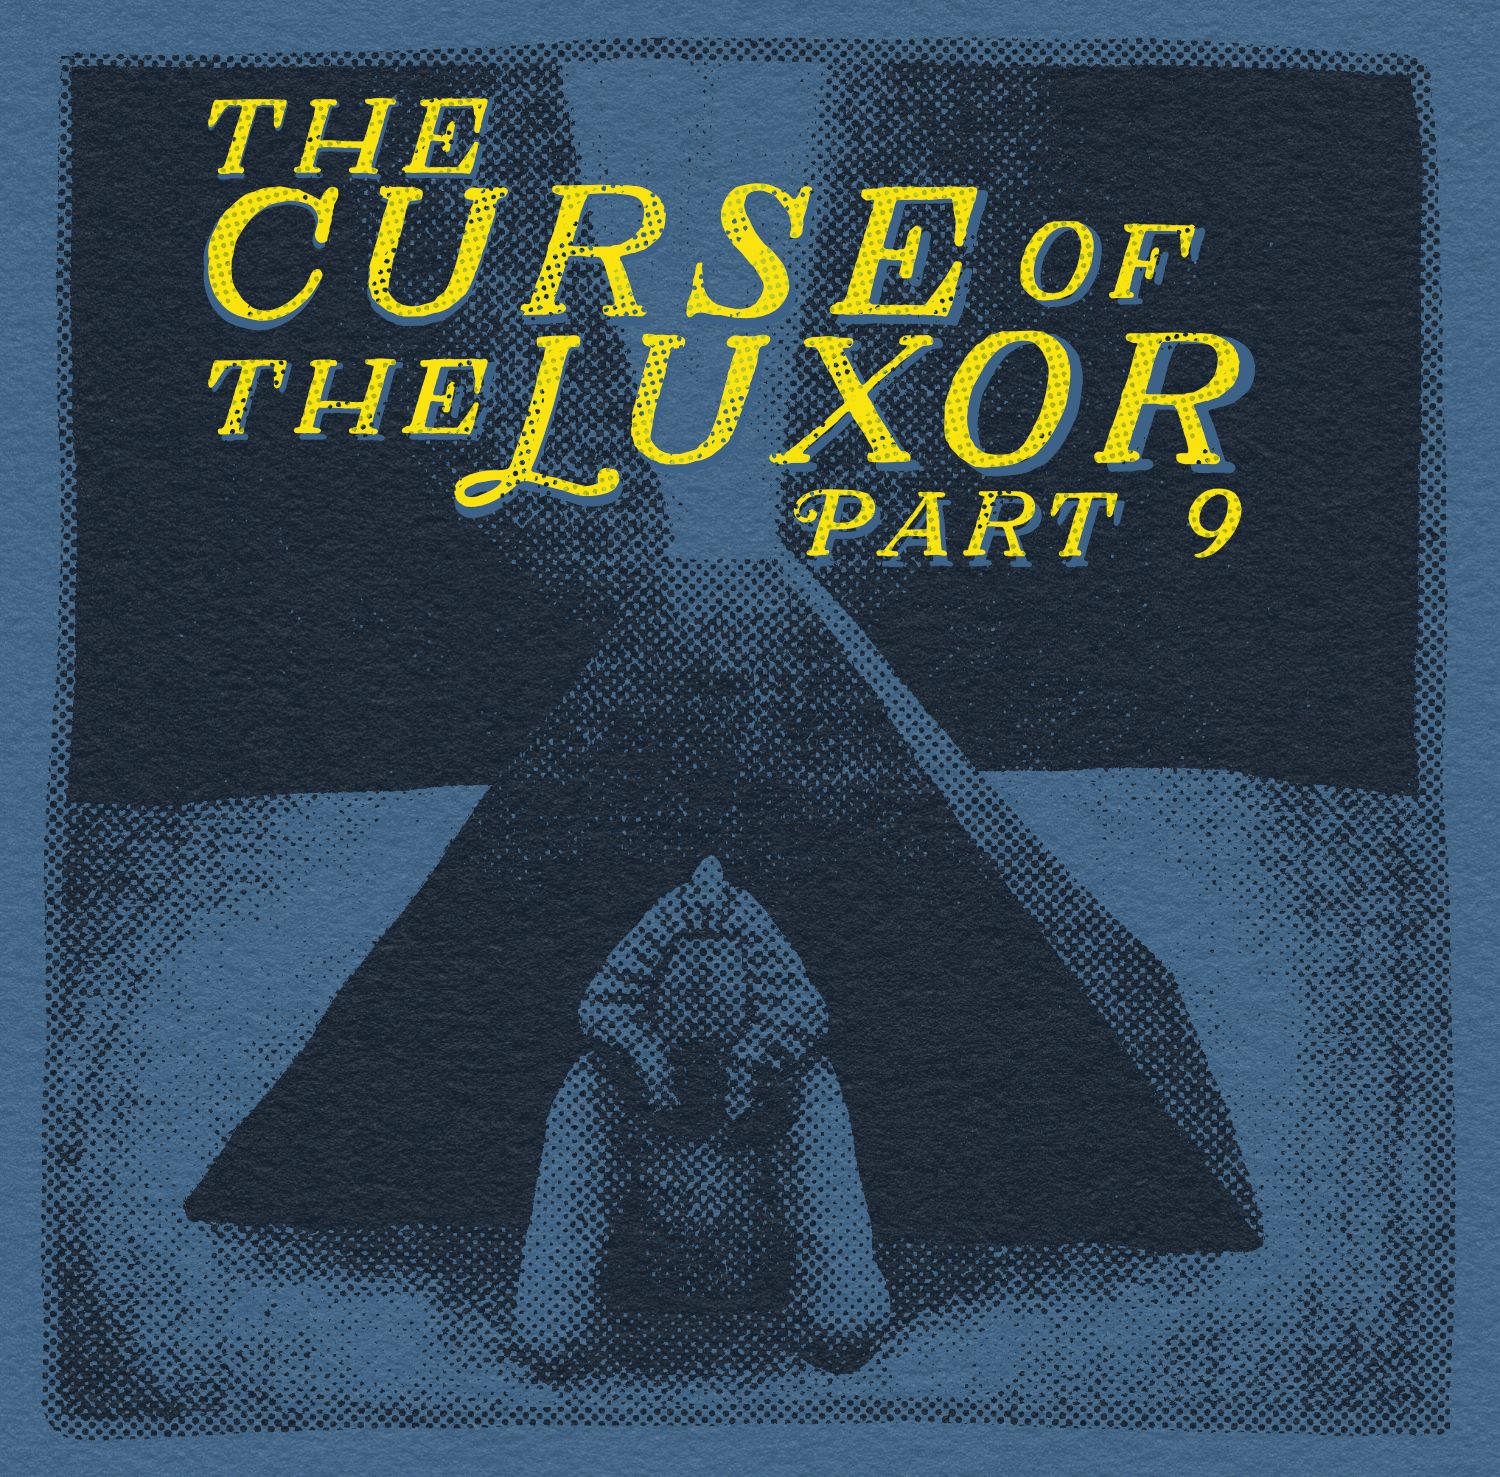 a halftone illustration of the Luxor hotel with the words The Curse of The Luxor Part 9